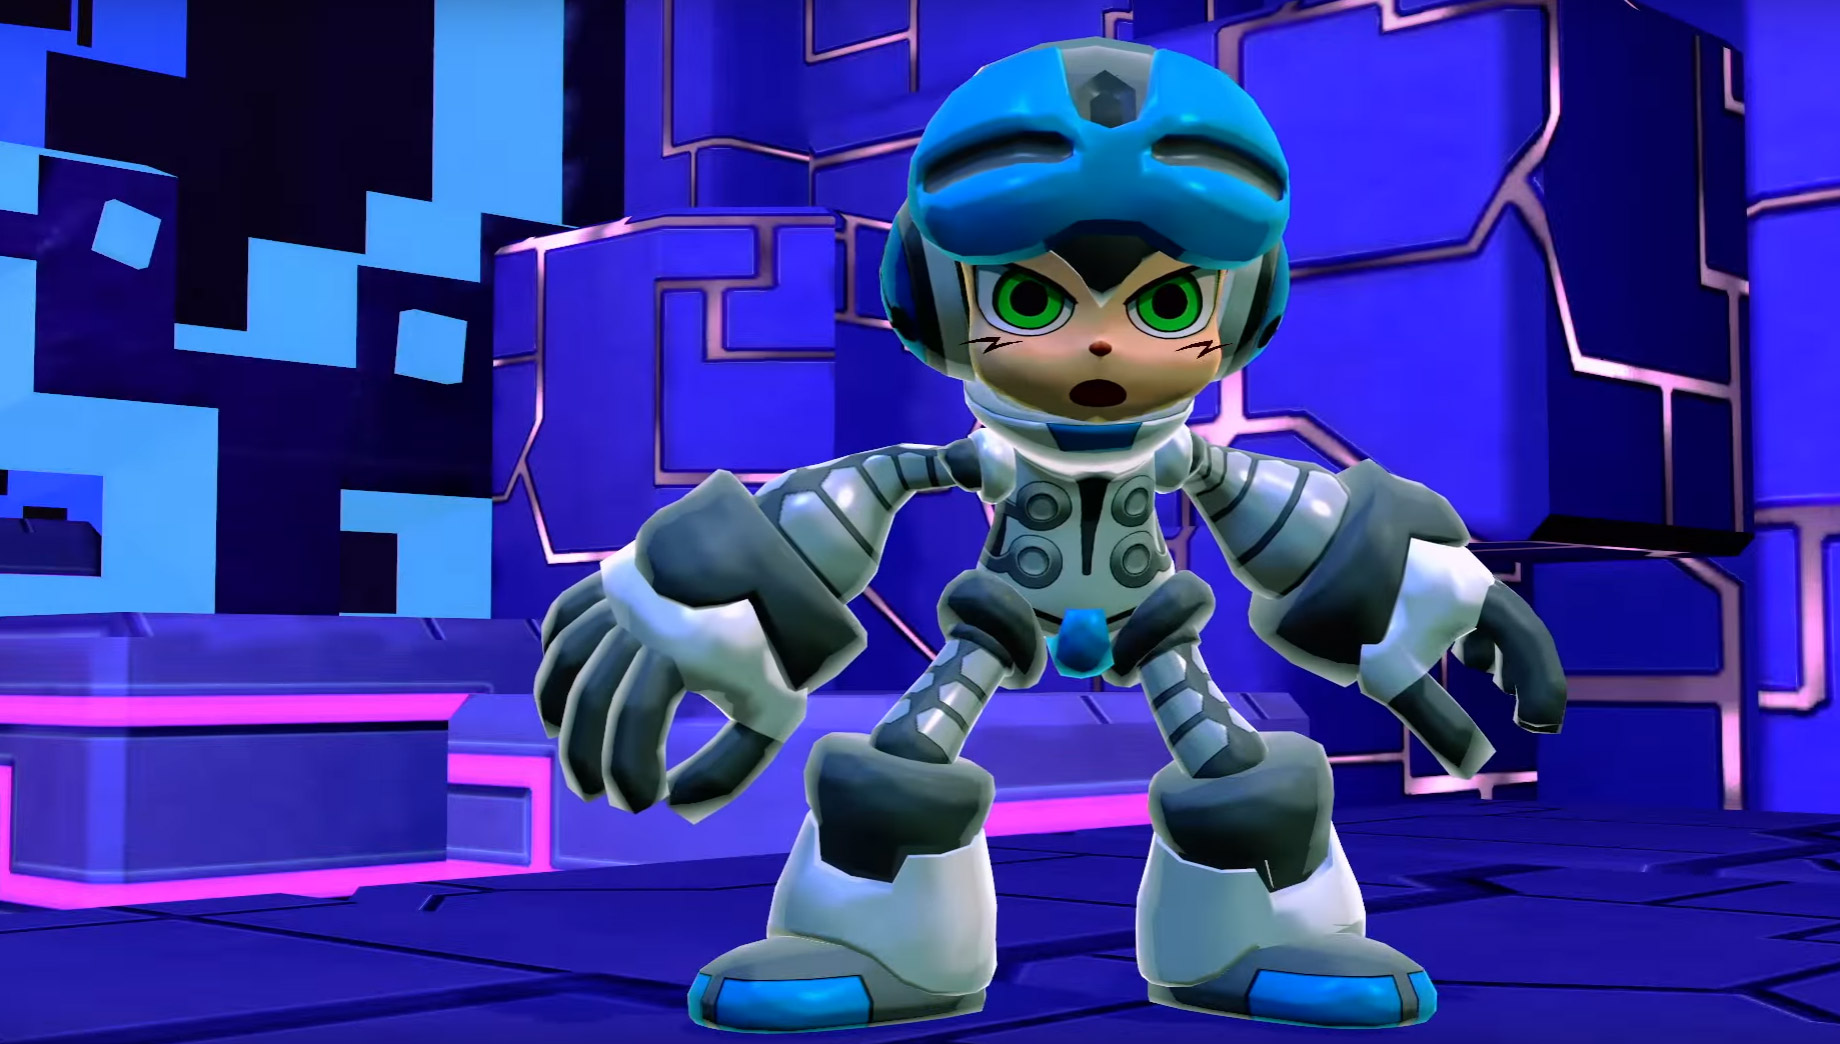 mighty no 9 release date download